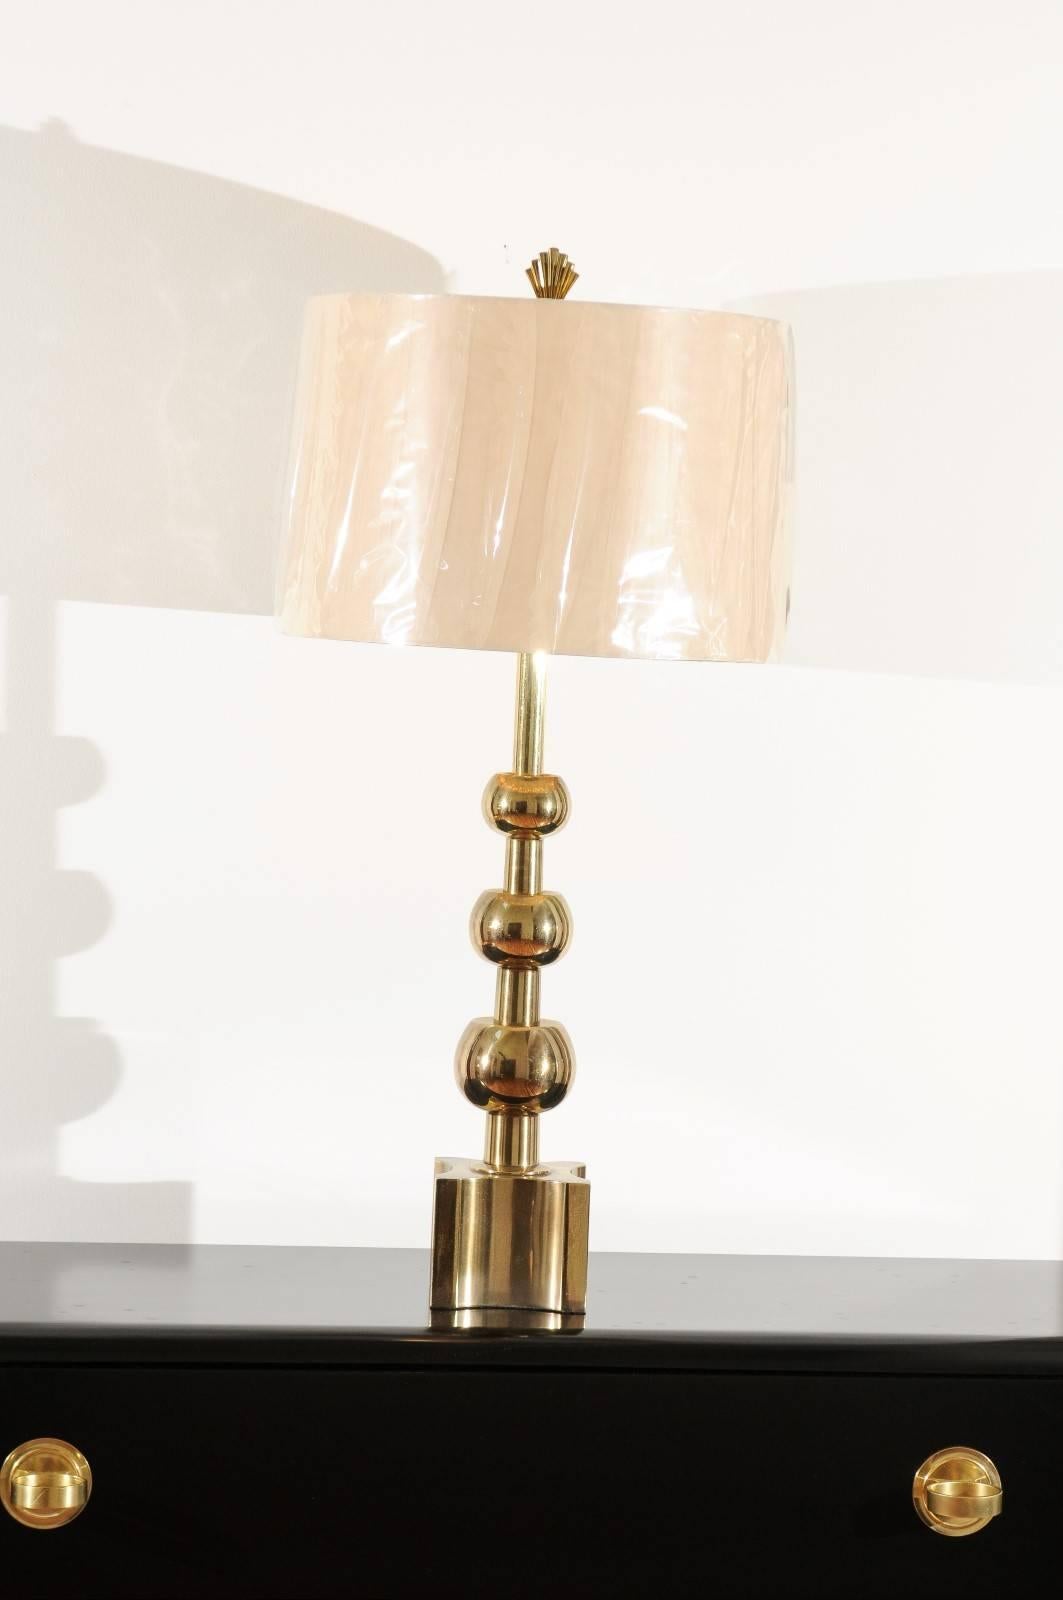 A stellar pair of large-scale brass lamps by Stiffel, circa 1960. Vertical graduated ball form atop a chunky plinth base. One of the most coveted designs in the Stiffel archive. Exquisite jewelry! Excellent restored condition. The pieces have been